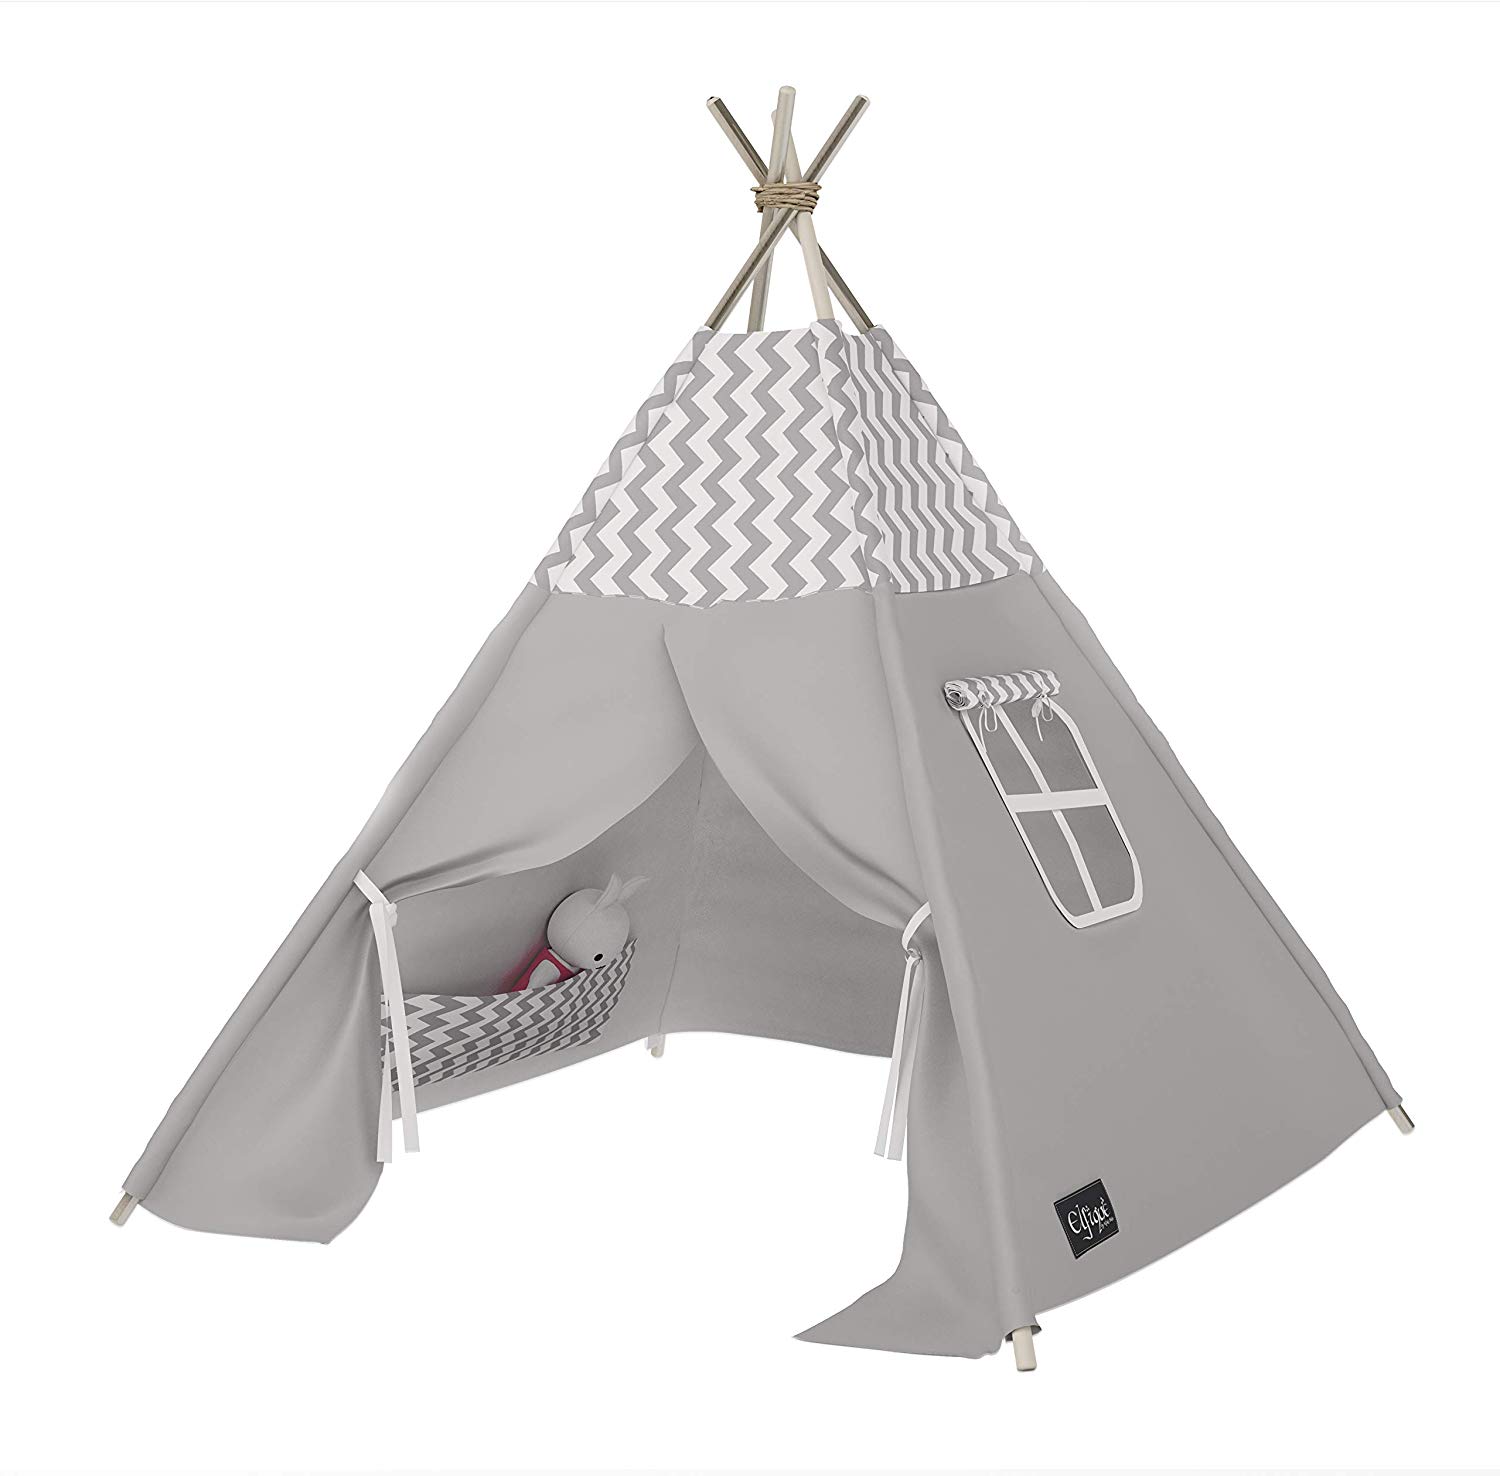 Elfique New Tipi Indian Tent Play Tent Double Padded Blanket